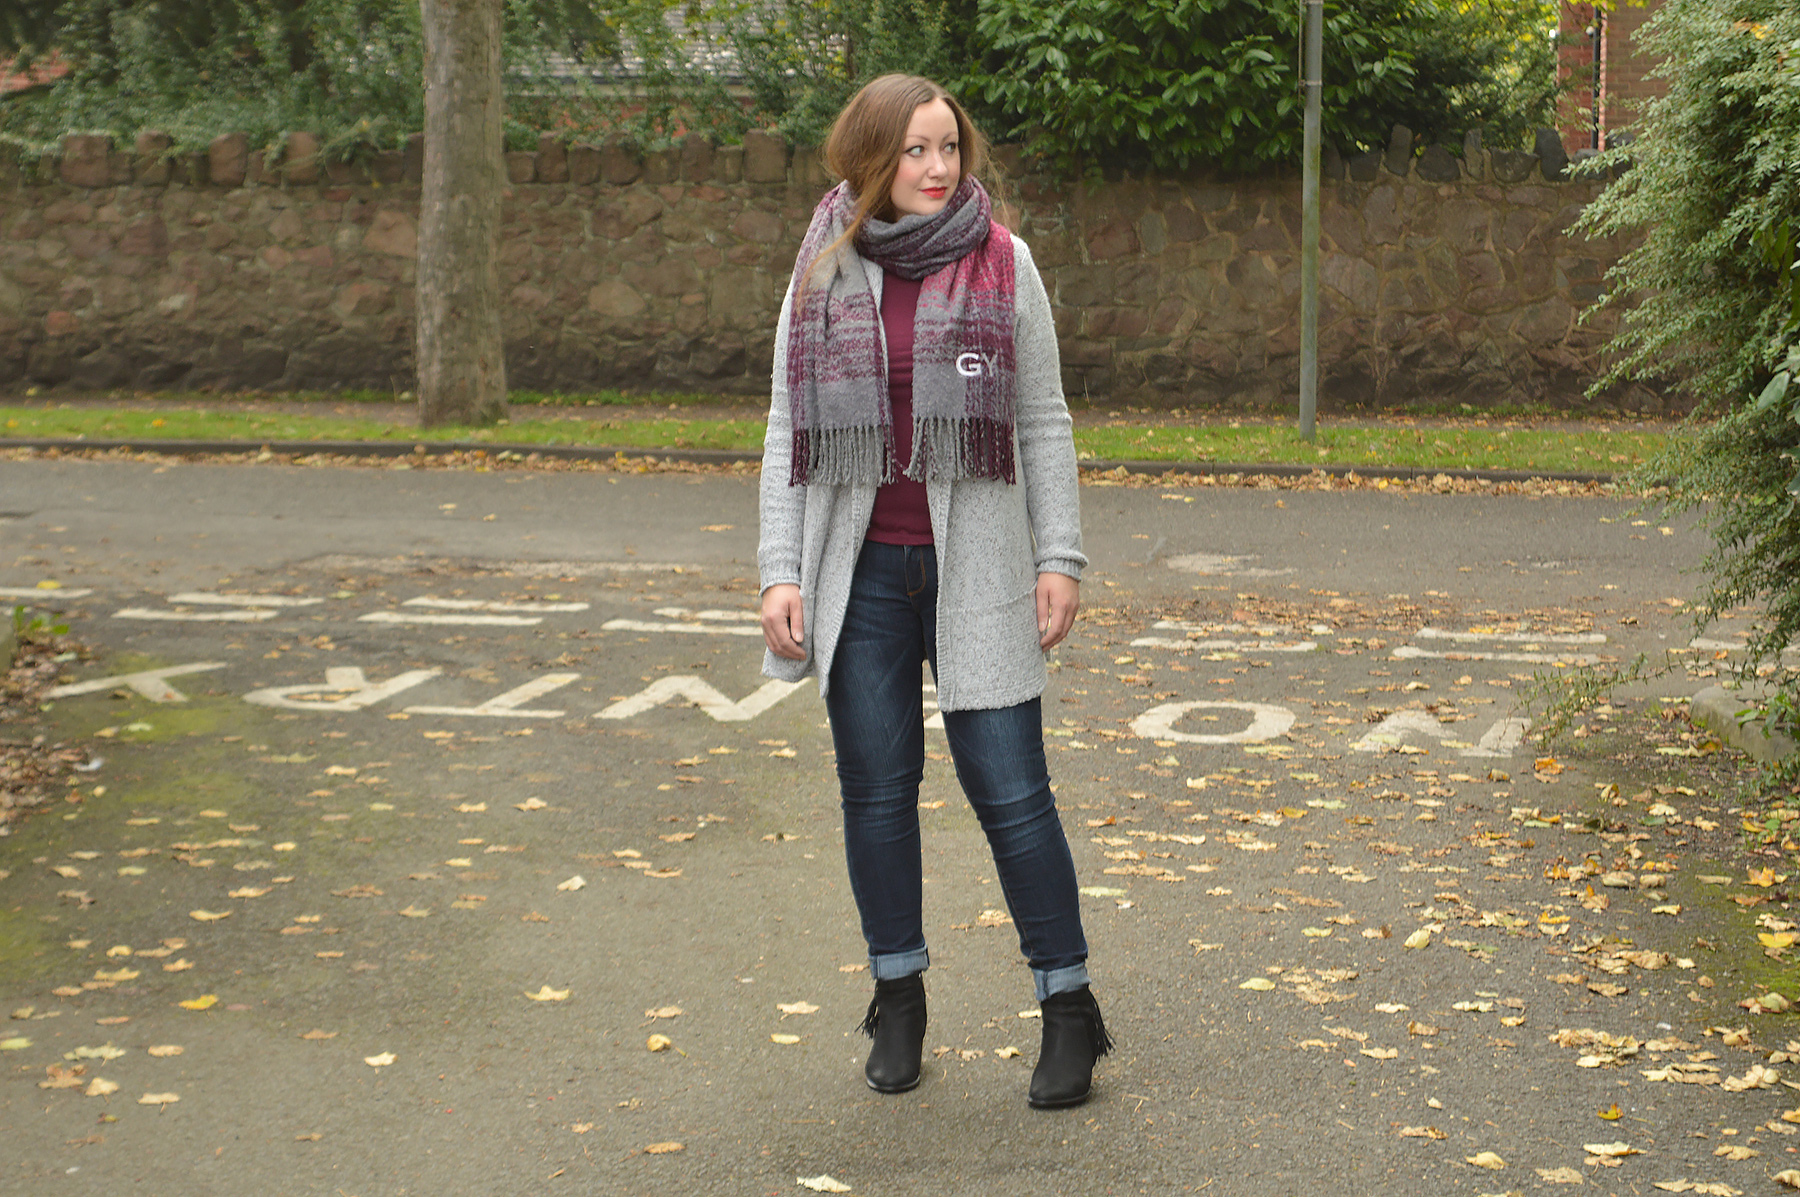 Autumn Blanket Scarf Outfit